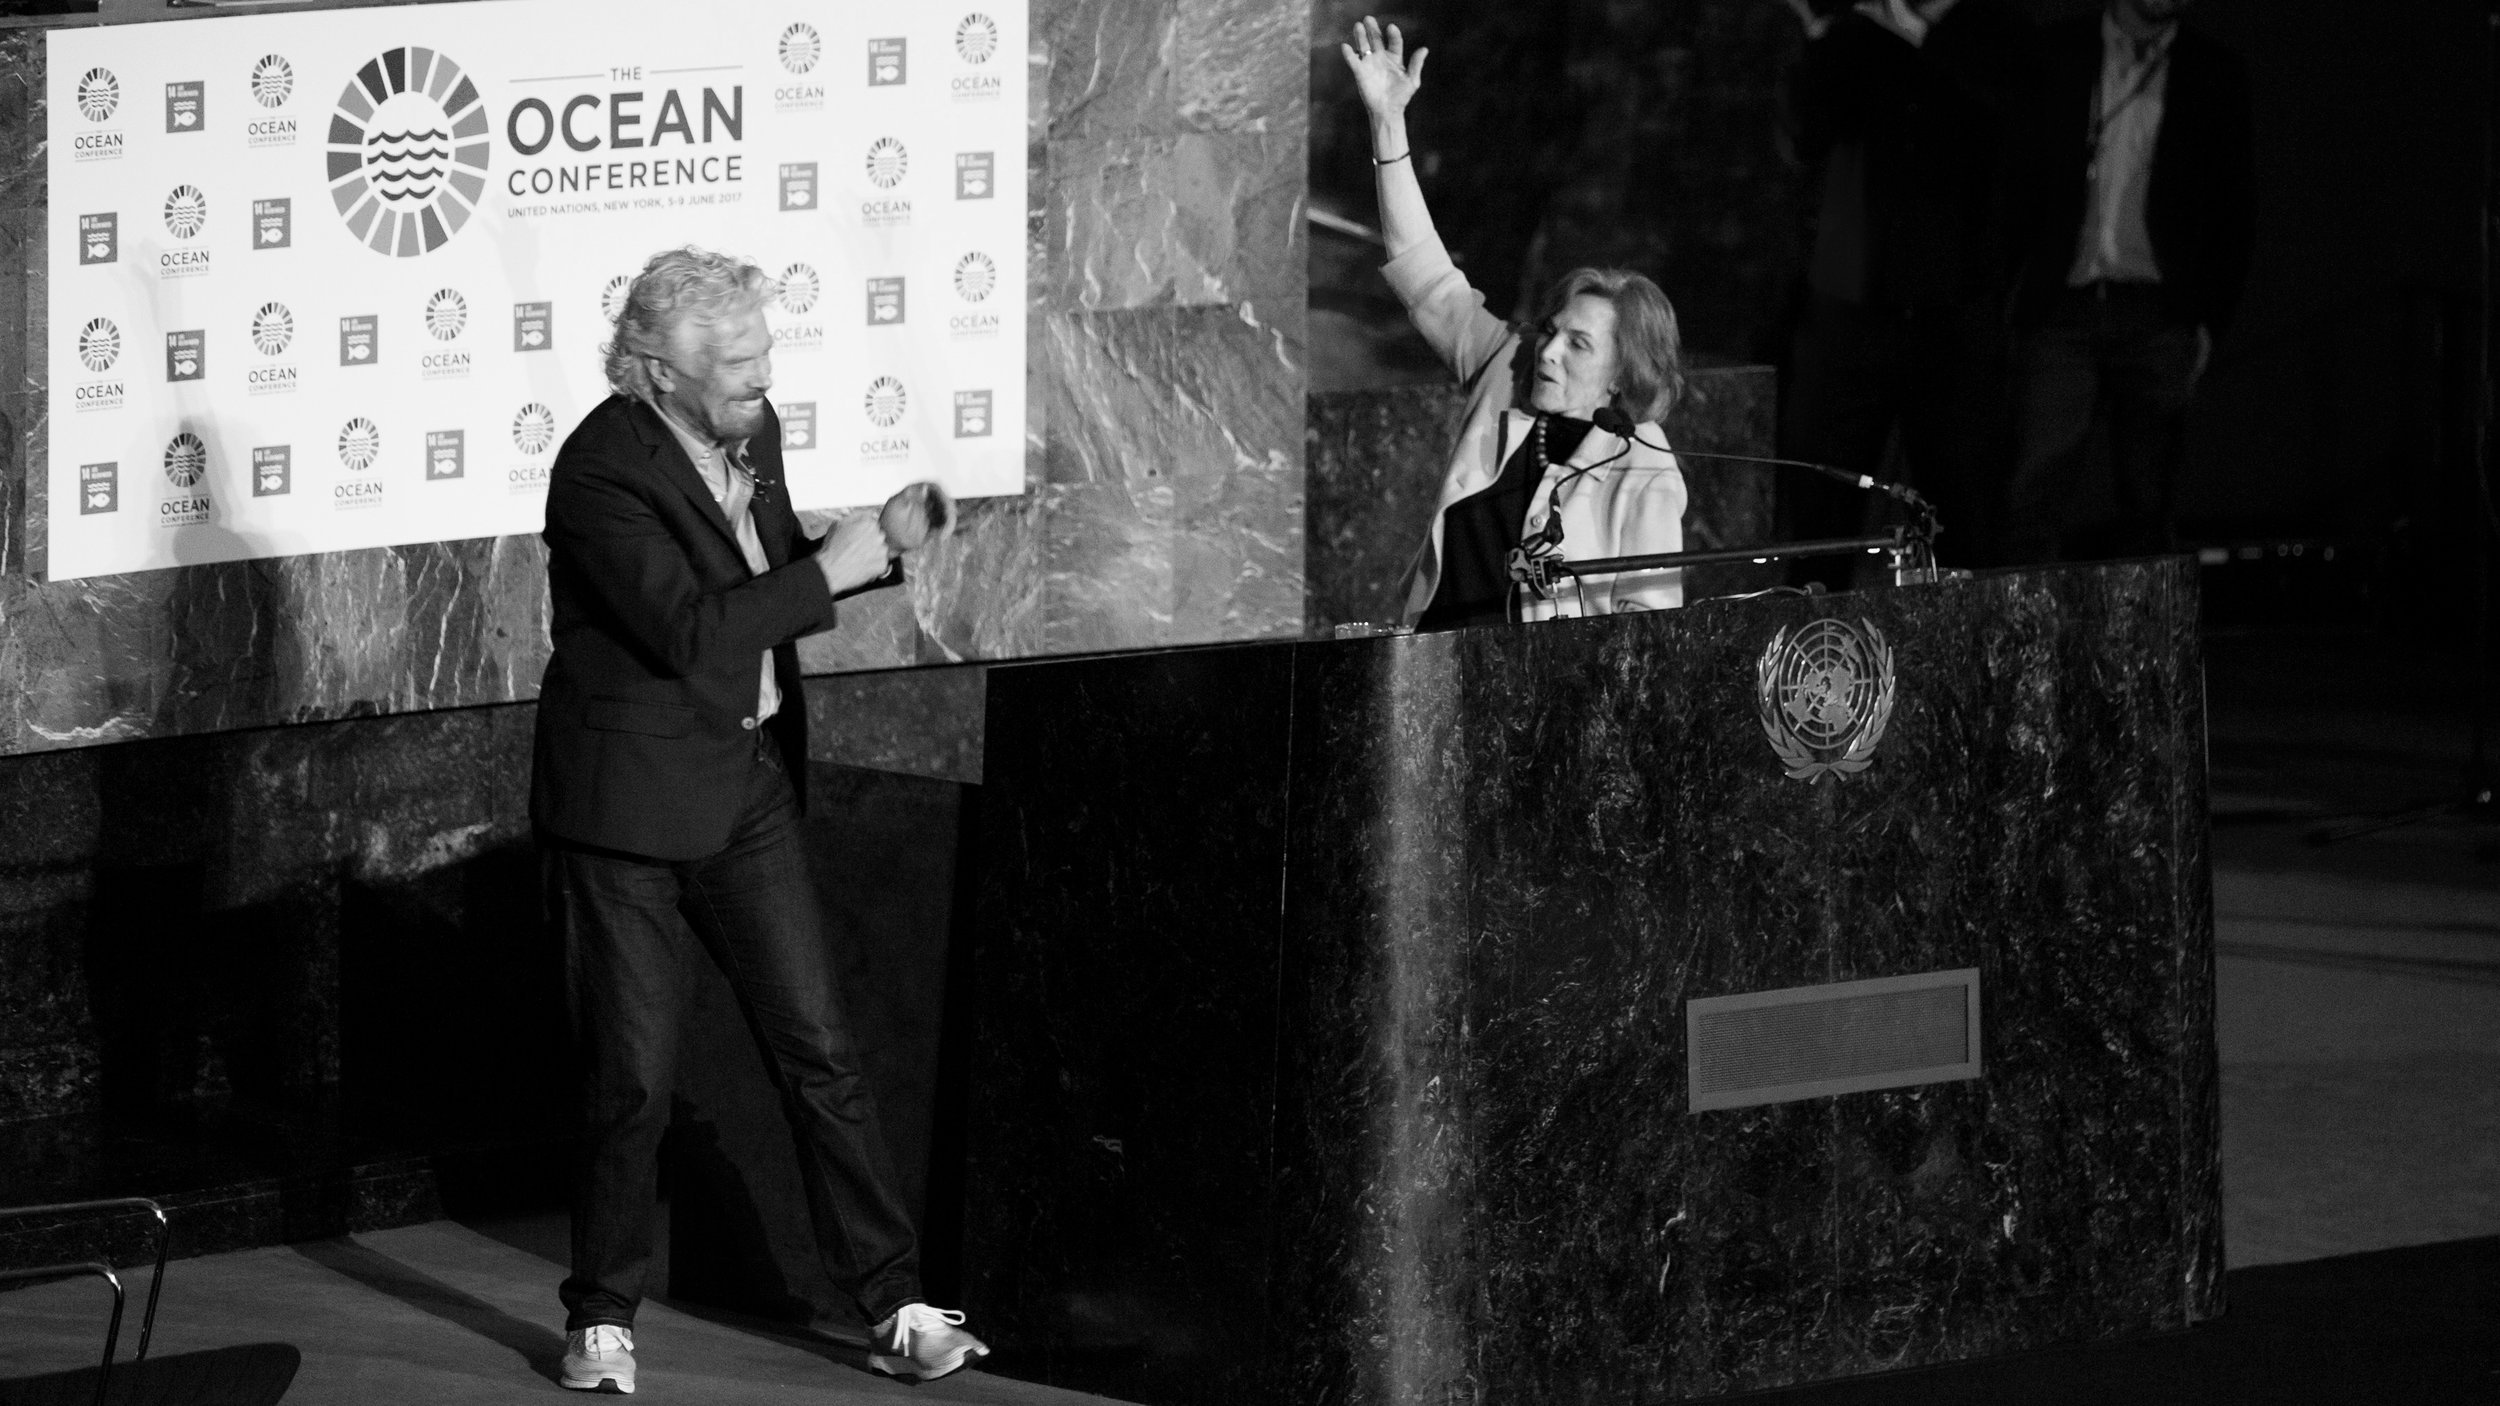  Richard Branson in adidas Parley shoes, Dr. Sylvia Earle 